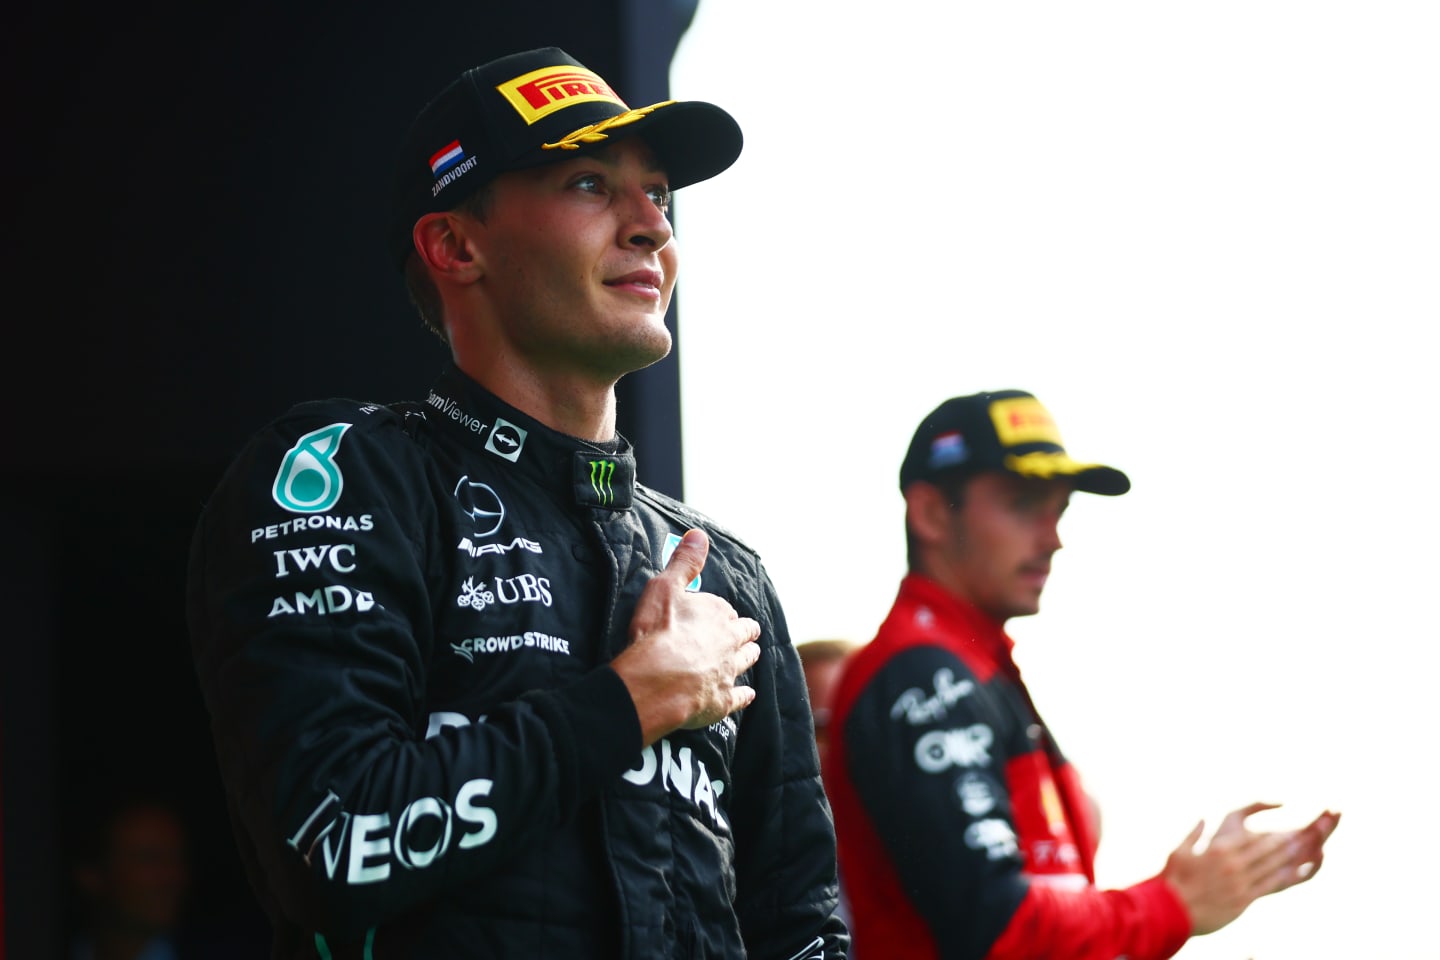 ZANDVOORT, NETHERLANDS - SEPTEMBER 04: Second placed George Russell of Great Britain and Mercedes celebrates on the podium during the F1 Grand Prix of The Netherlands at Circuit Zandvoort on September 04, 2022 in Zandvoort, Netherlands. (Photo by Dan Istitene - Formula 1/Formula 1 via Getty Images)